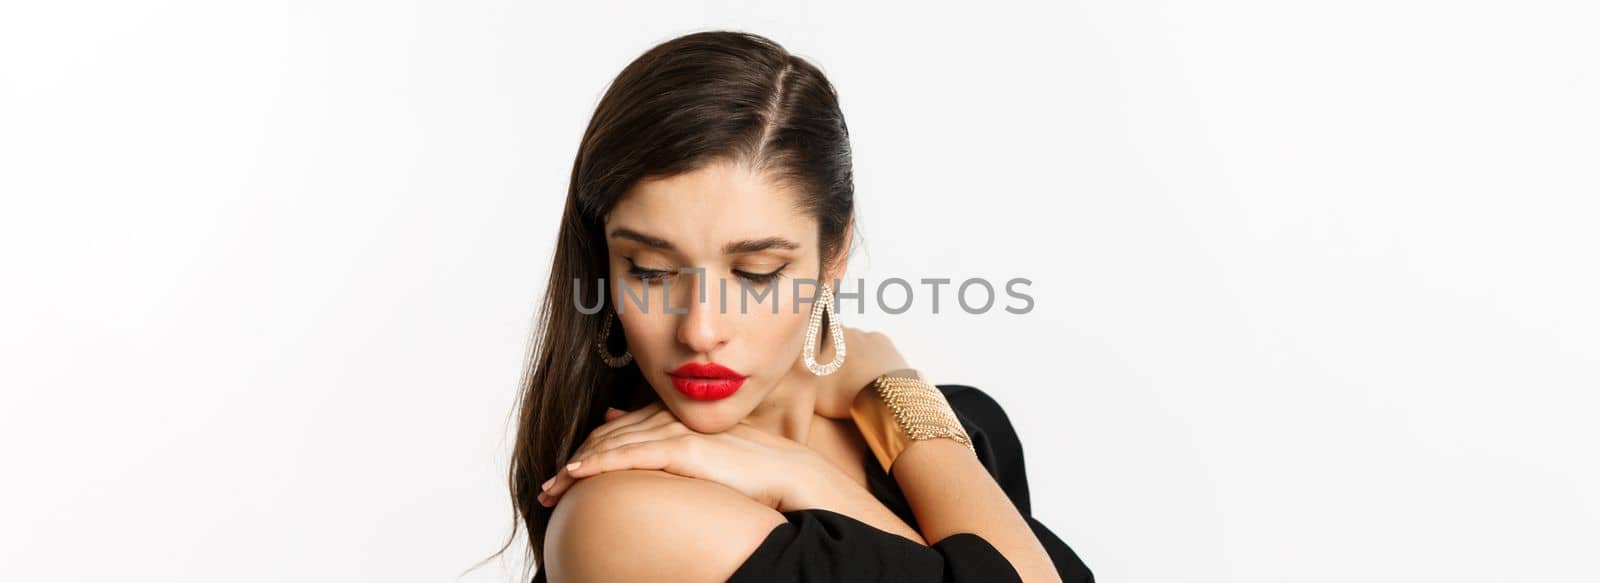 Fashion and beauty concept. Close-up of sensual woman in elegant earrings and black dress, wearing makeup with red lips, looking down tenderly, standing over white background.